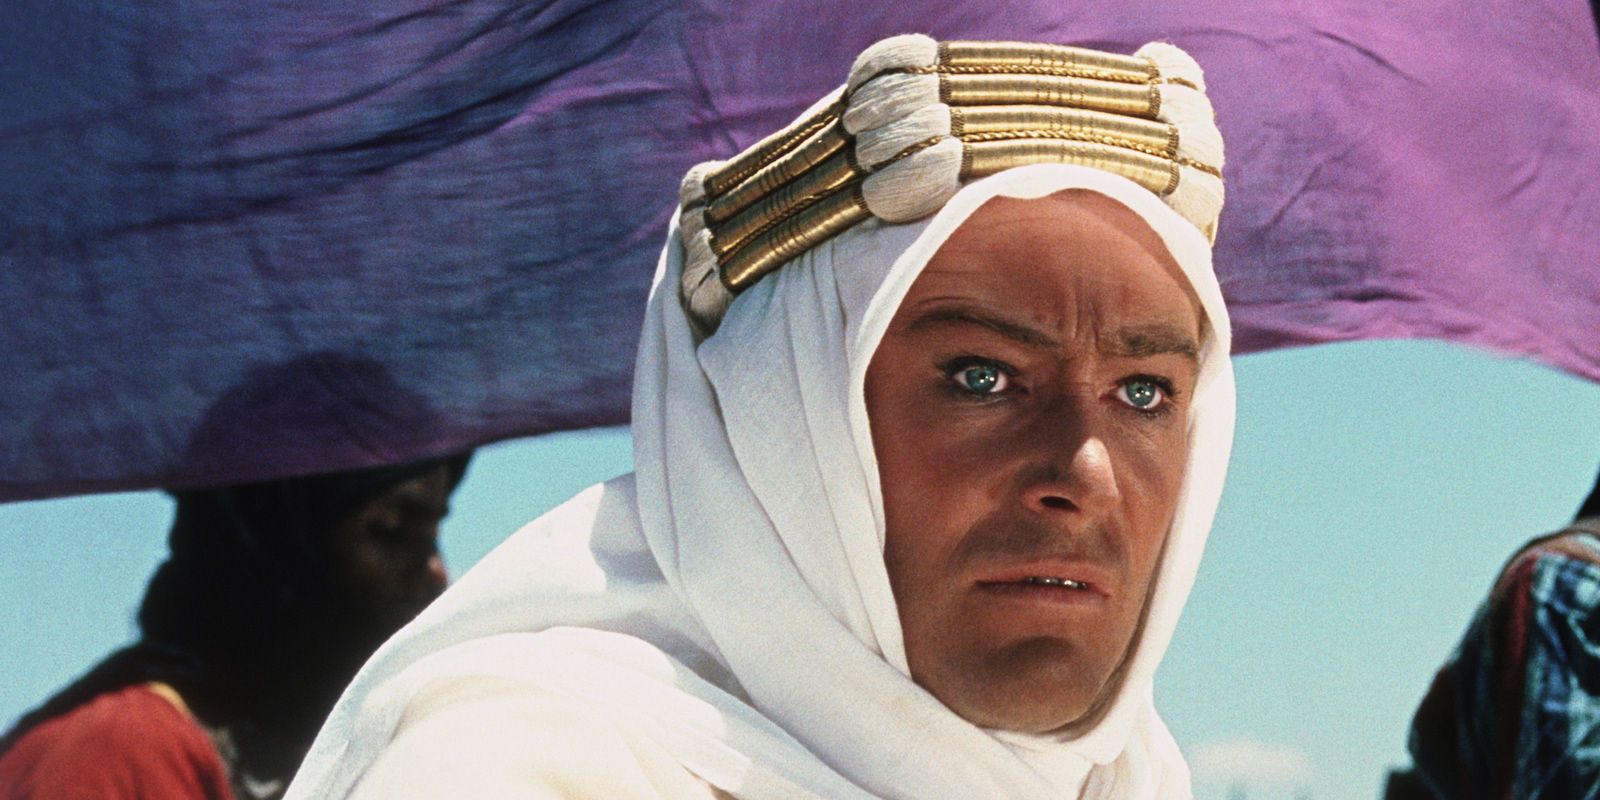 The 10 Best Epic Movies Of All Time, According To The AFI